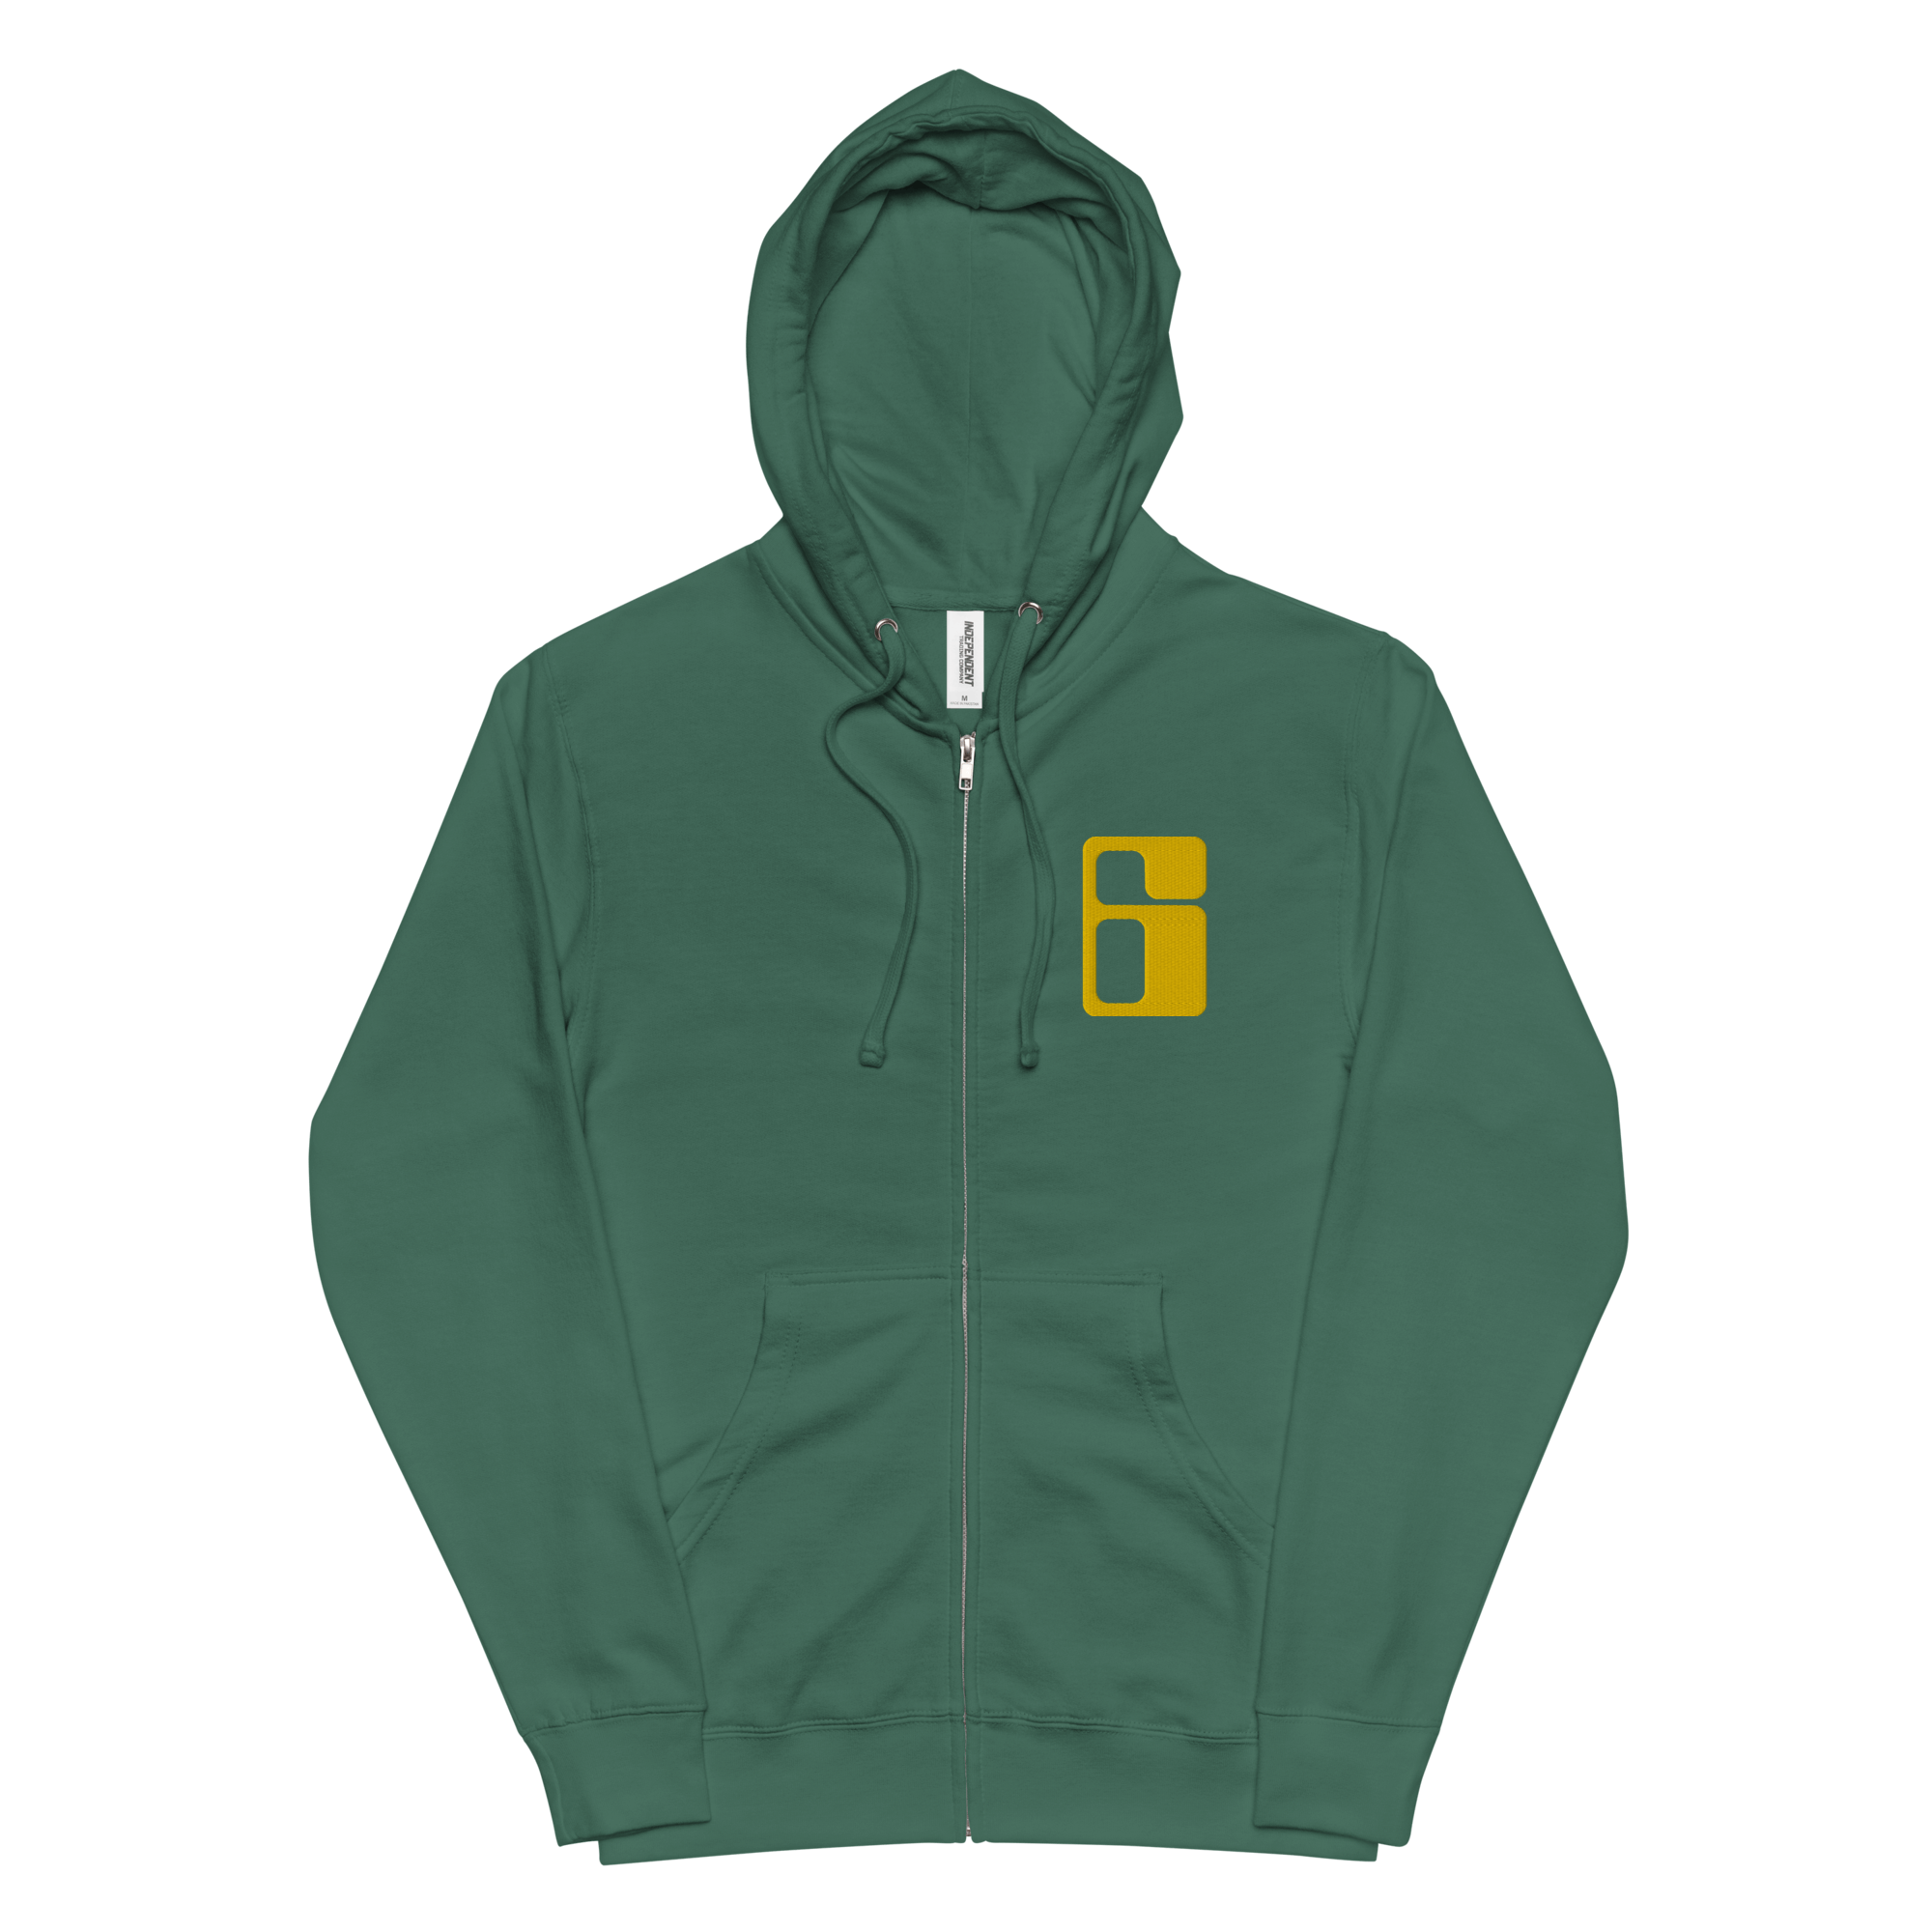 Rollerball 1975 Embroidery Zip Up HoodieStep into retro-cool with the Rollerball 1975 Embroidery Zip Up Hoodie. Crafted from soft, premium-quality fleece and featuring a jersey-lined hood, this unisex zip-up is your ticket to cozy vintage vibes. Pair it e